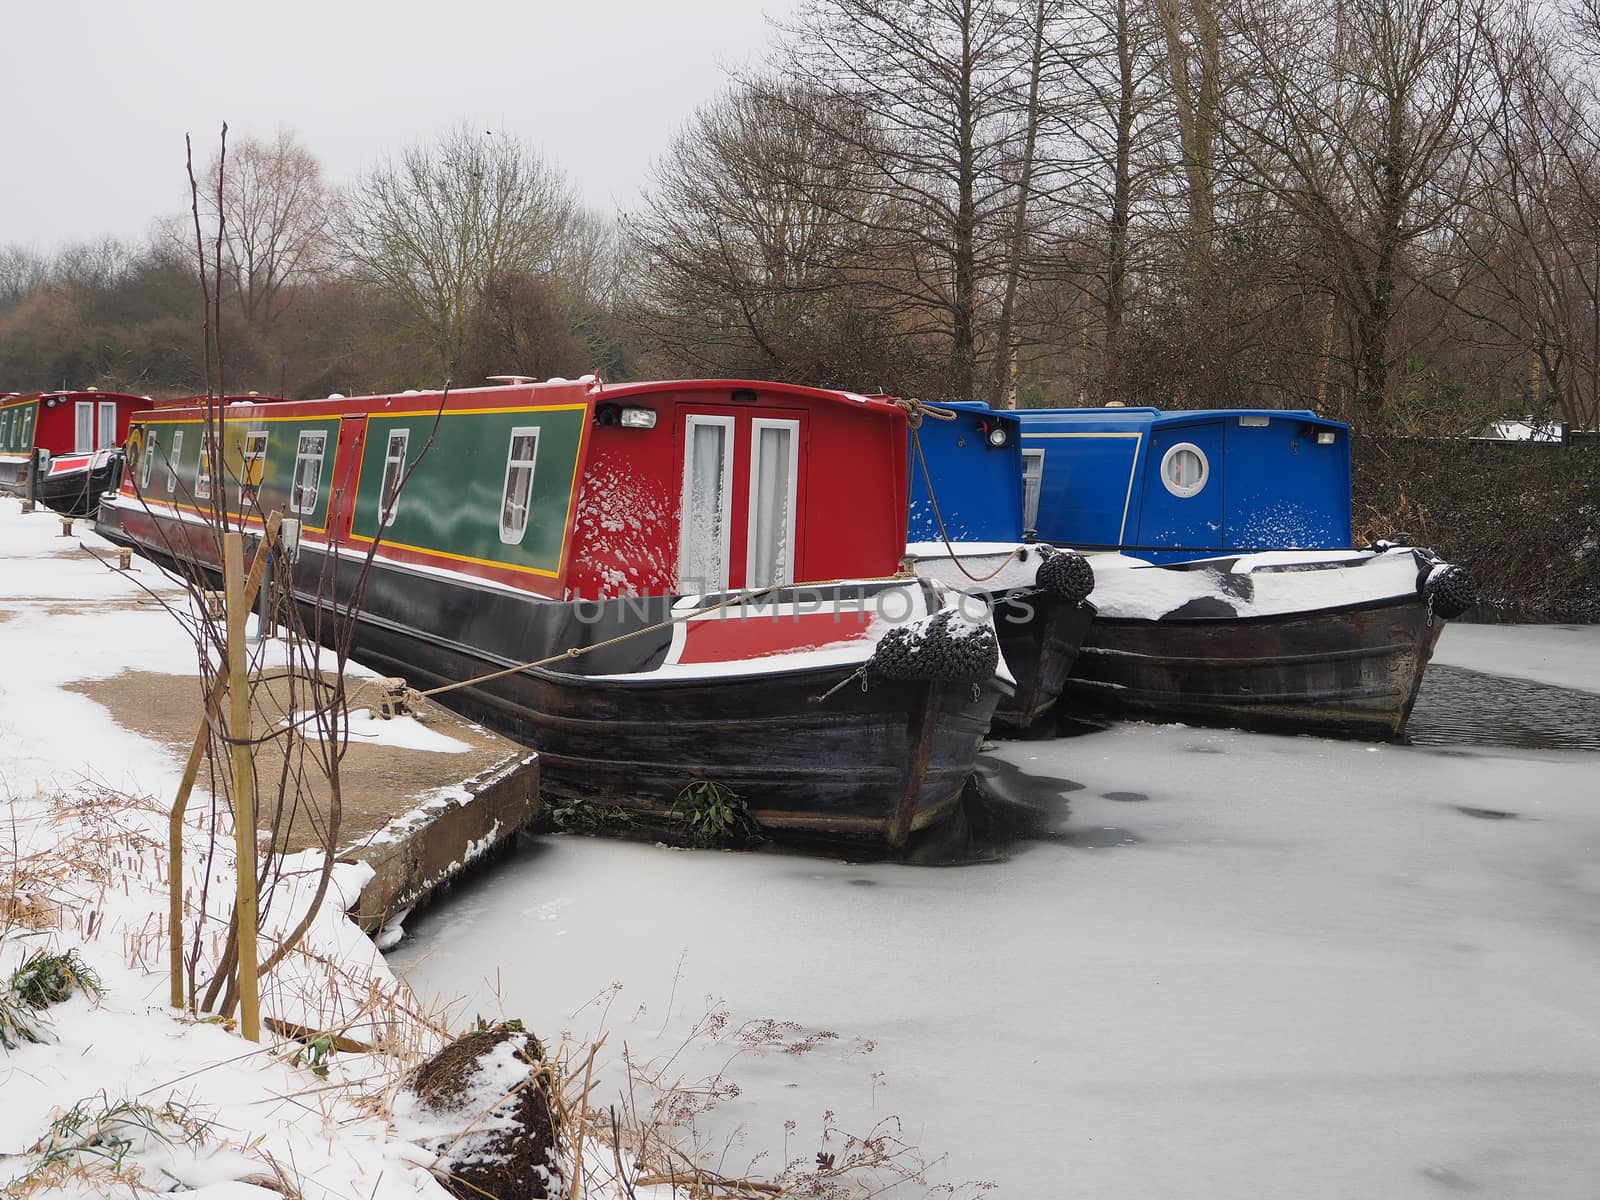 Colorful canal boats moored in icy water, Kennet and Avon Canal by PhilHarland